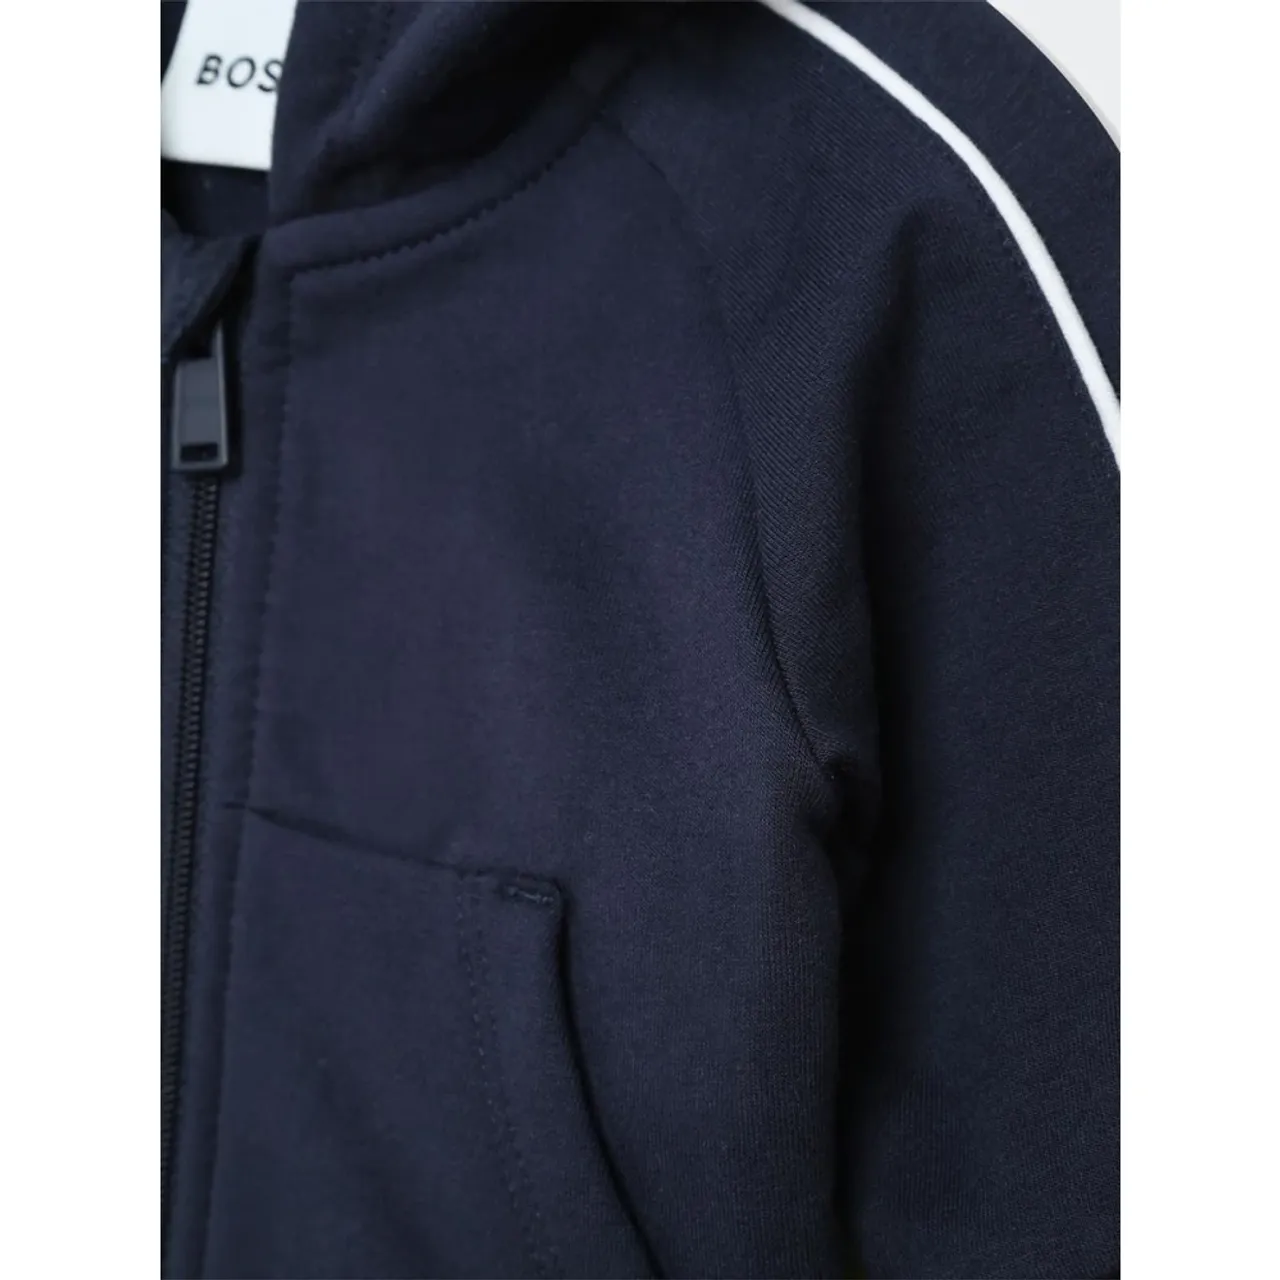 Hugo Boss , Sporty Set Hoodie, T-Shirt, and Jogging Pants ,Blue male, Sizes: